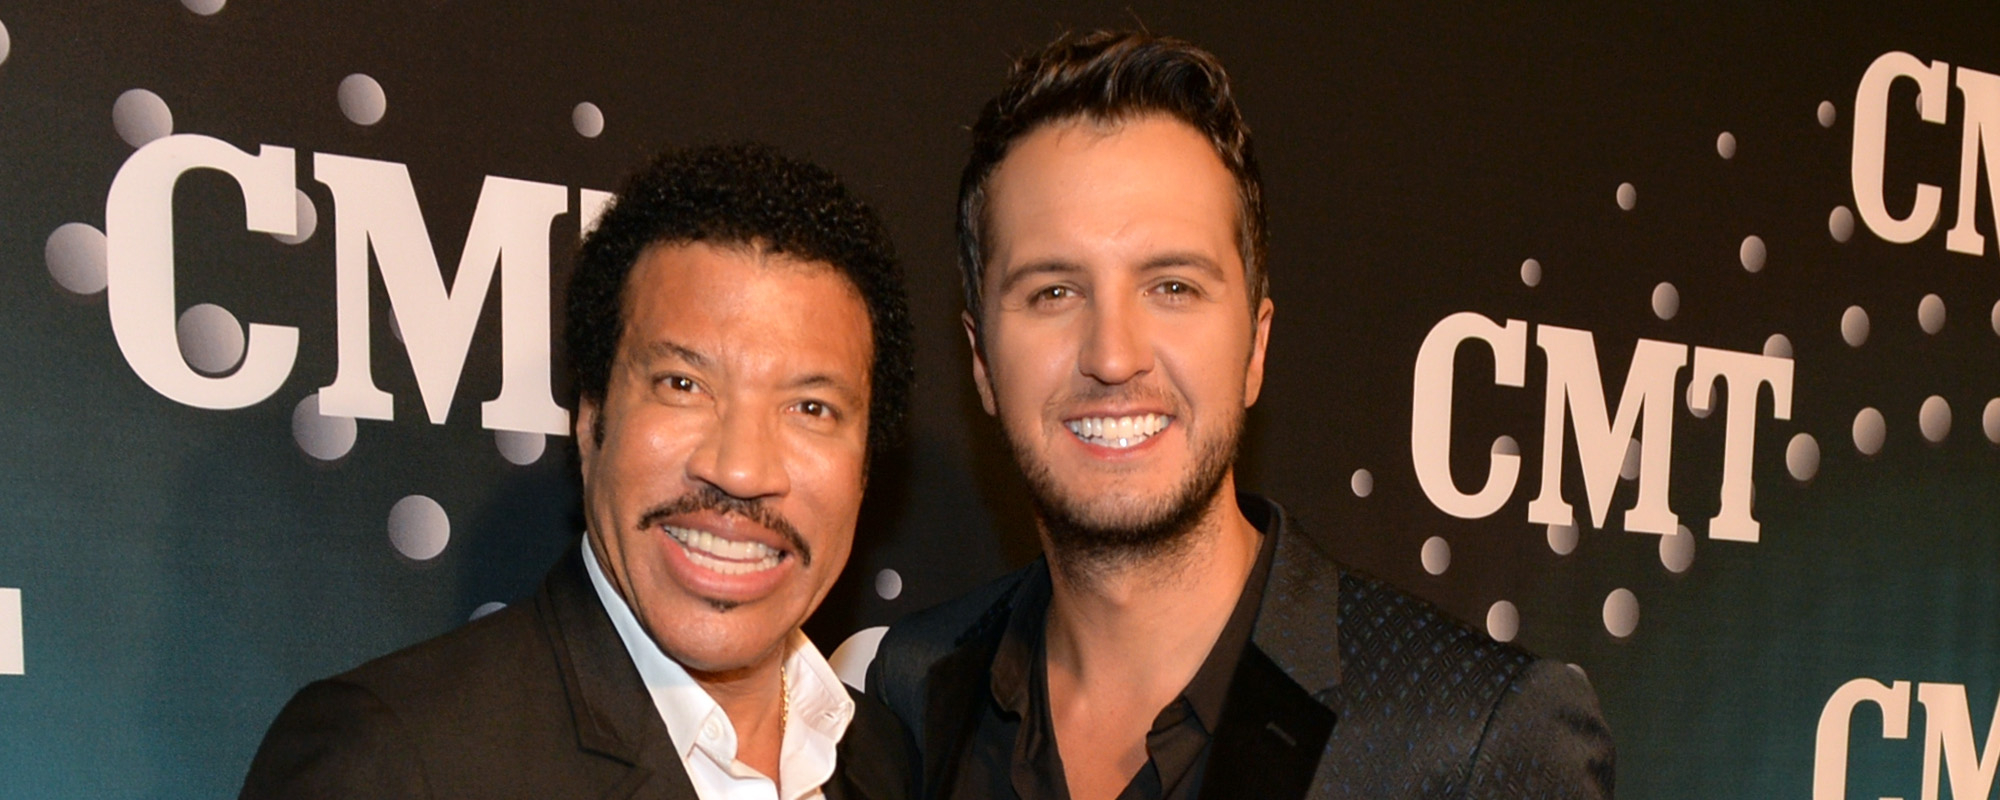 Are Lionel Richie and Luke Bryan Returning to ‘American Idol’ Next Season? Katy Perry’s Exit Shakes up Judge Panel